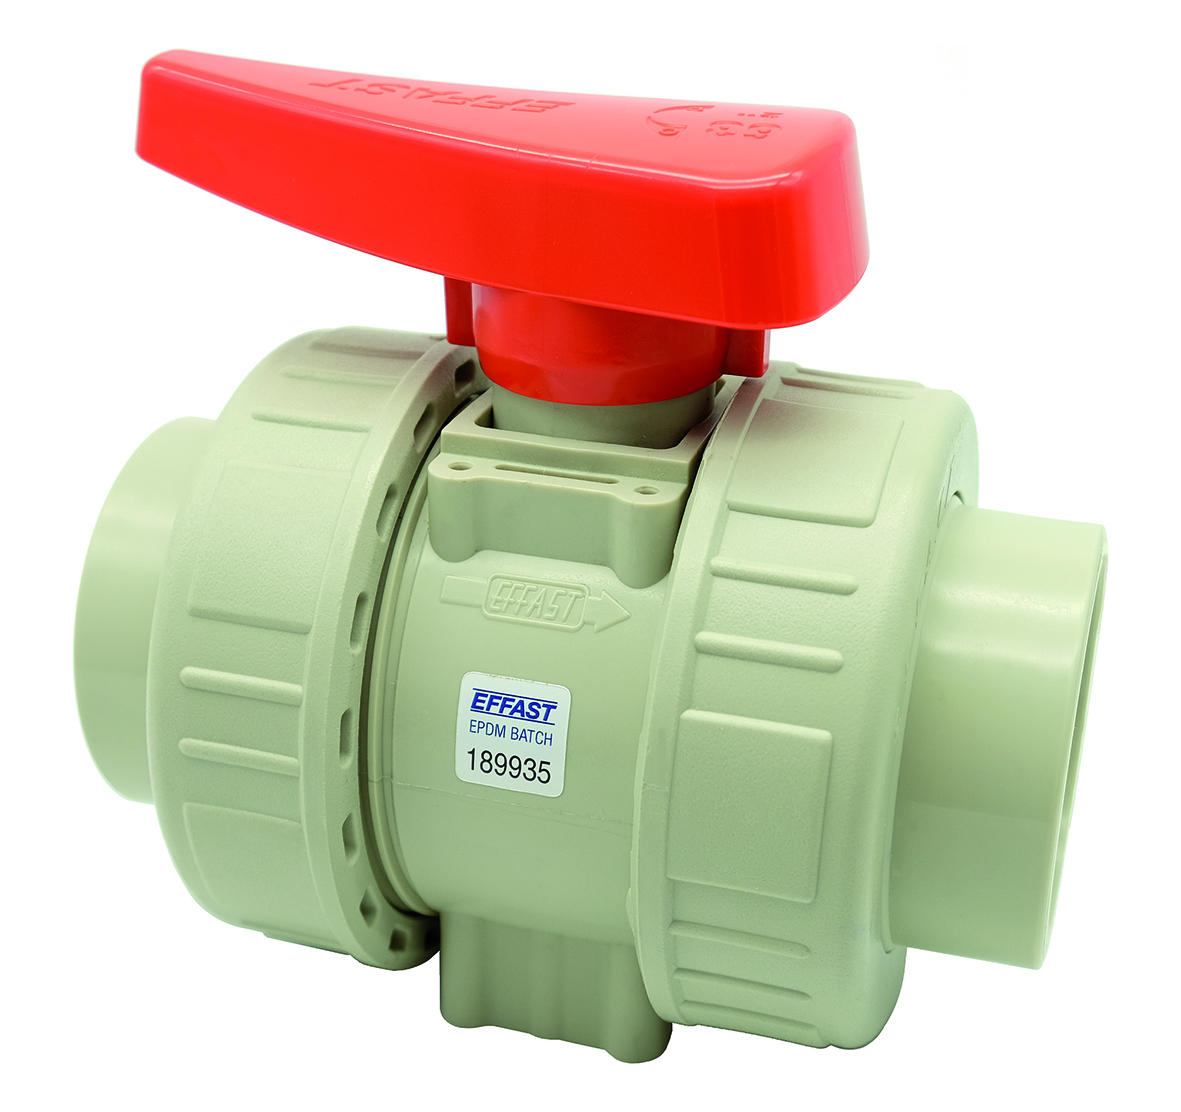 PP-H double union ball valve BK1 - EFFAST - 100% Made in Italy